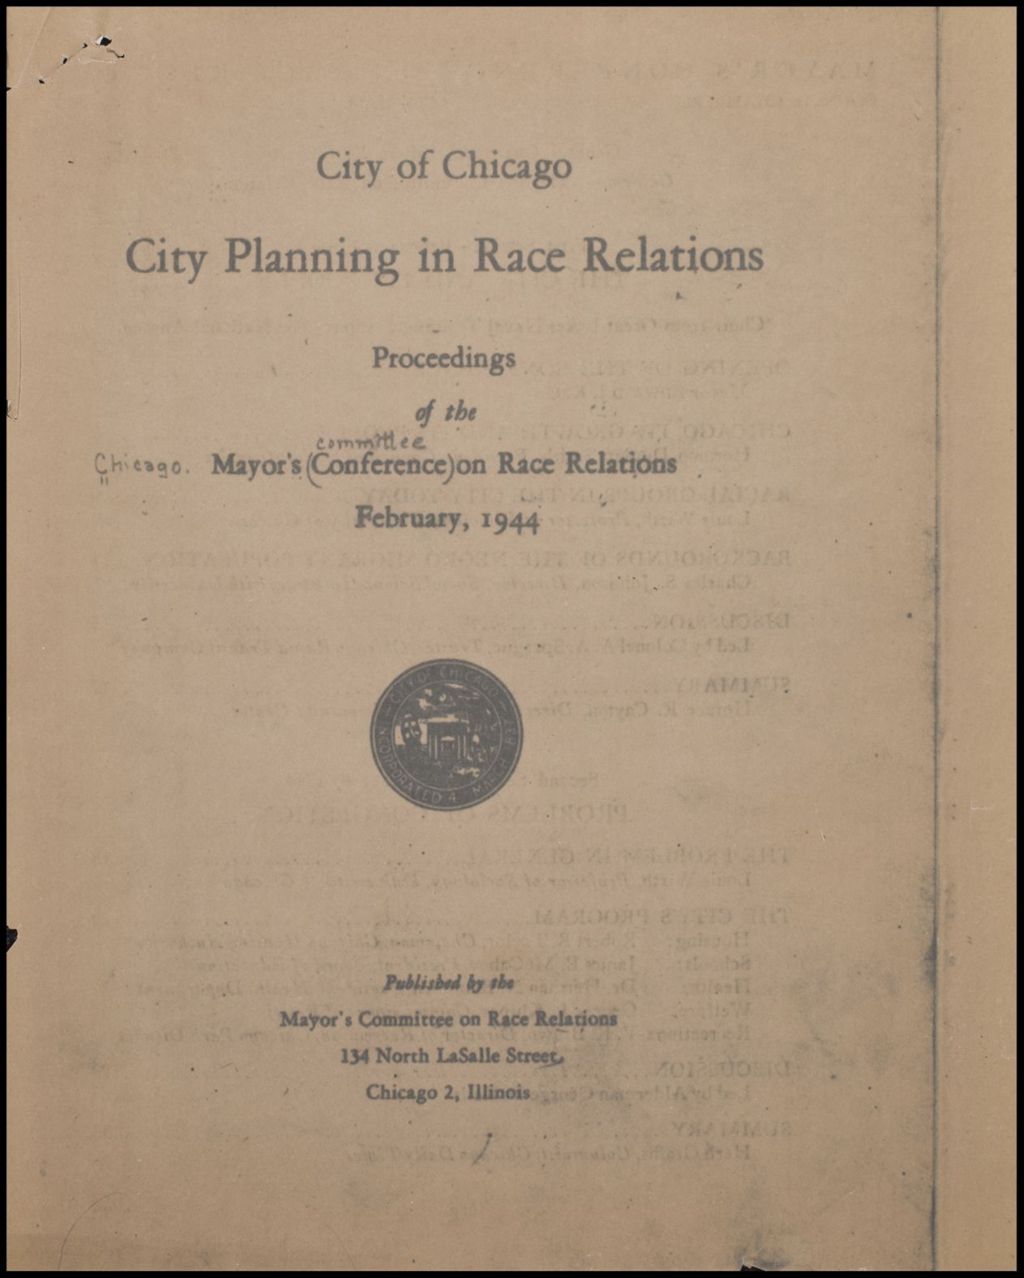 Miniature of Mayors Committee on Race Relations City Planning in Race Relations, 1944 (Folder III-1846)